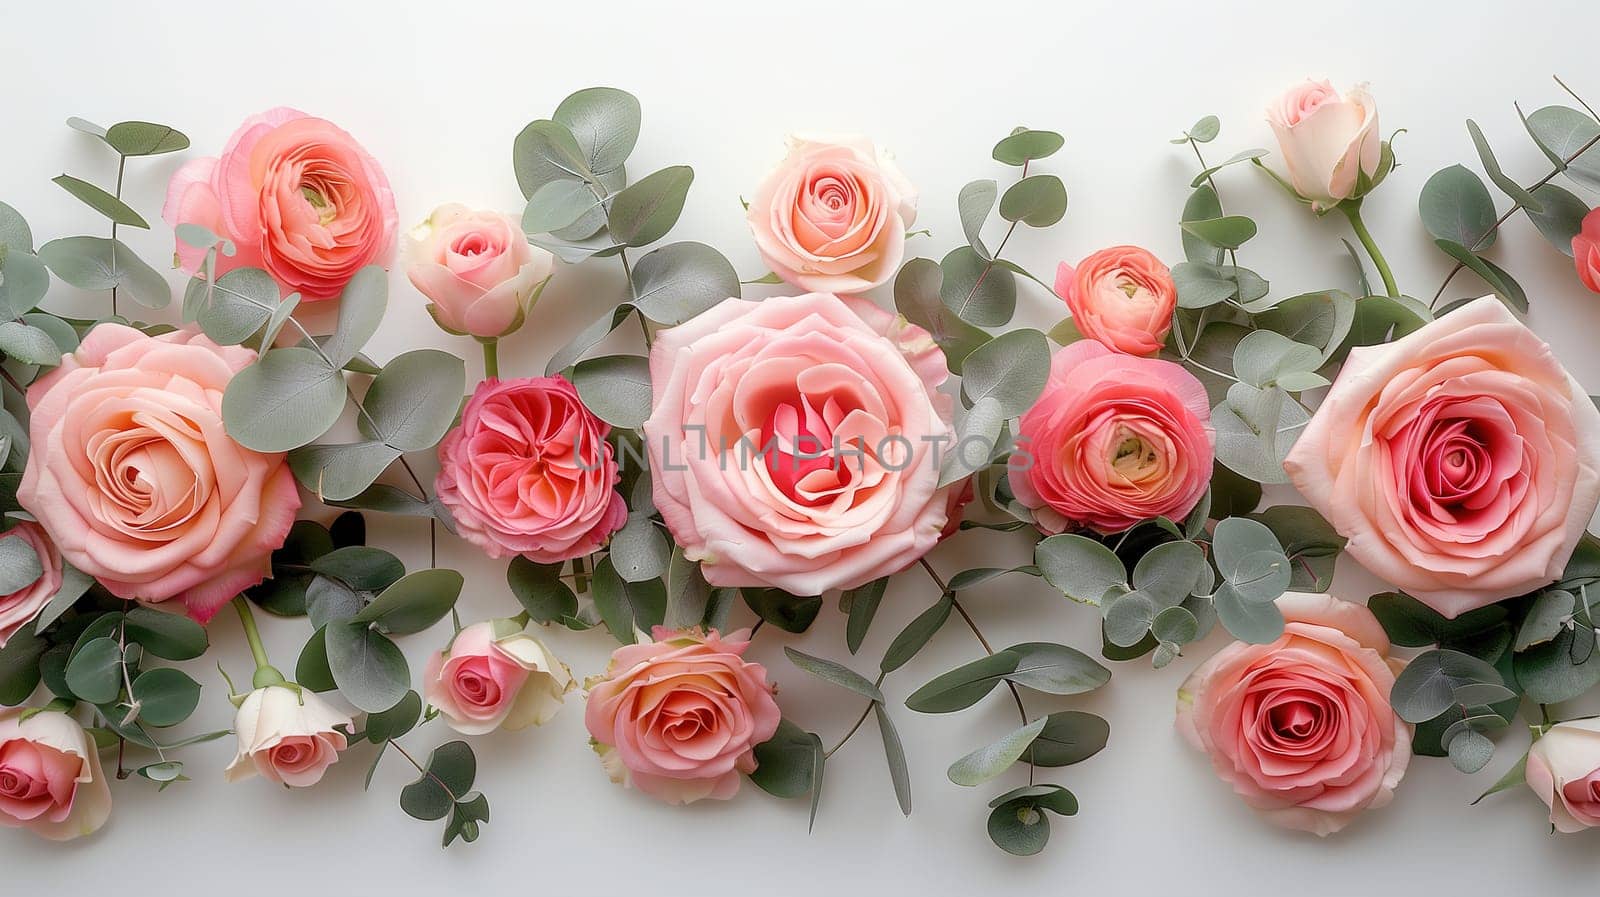 A vibrant group of pink roses, with delicate petals and lush green leaves, blooms gracefully. The roses stand out against the backdrop, showcasing their beauty in full bloom.